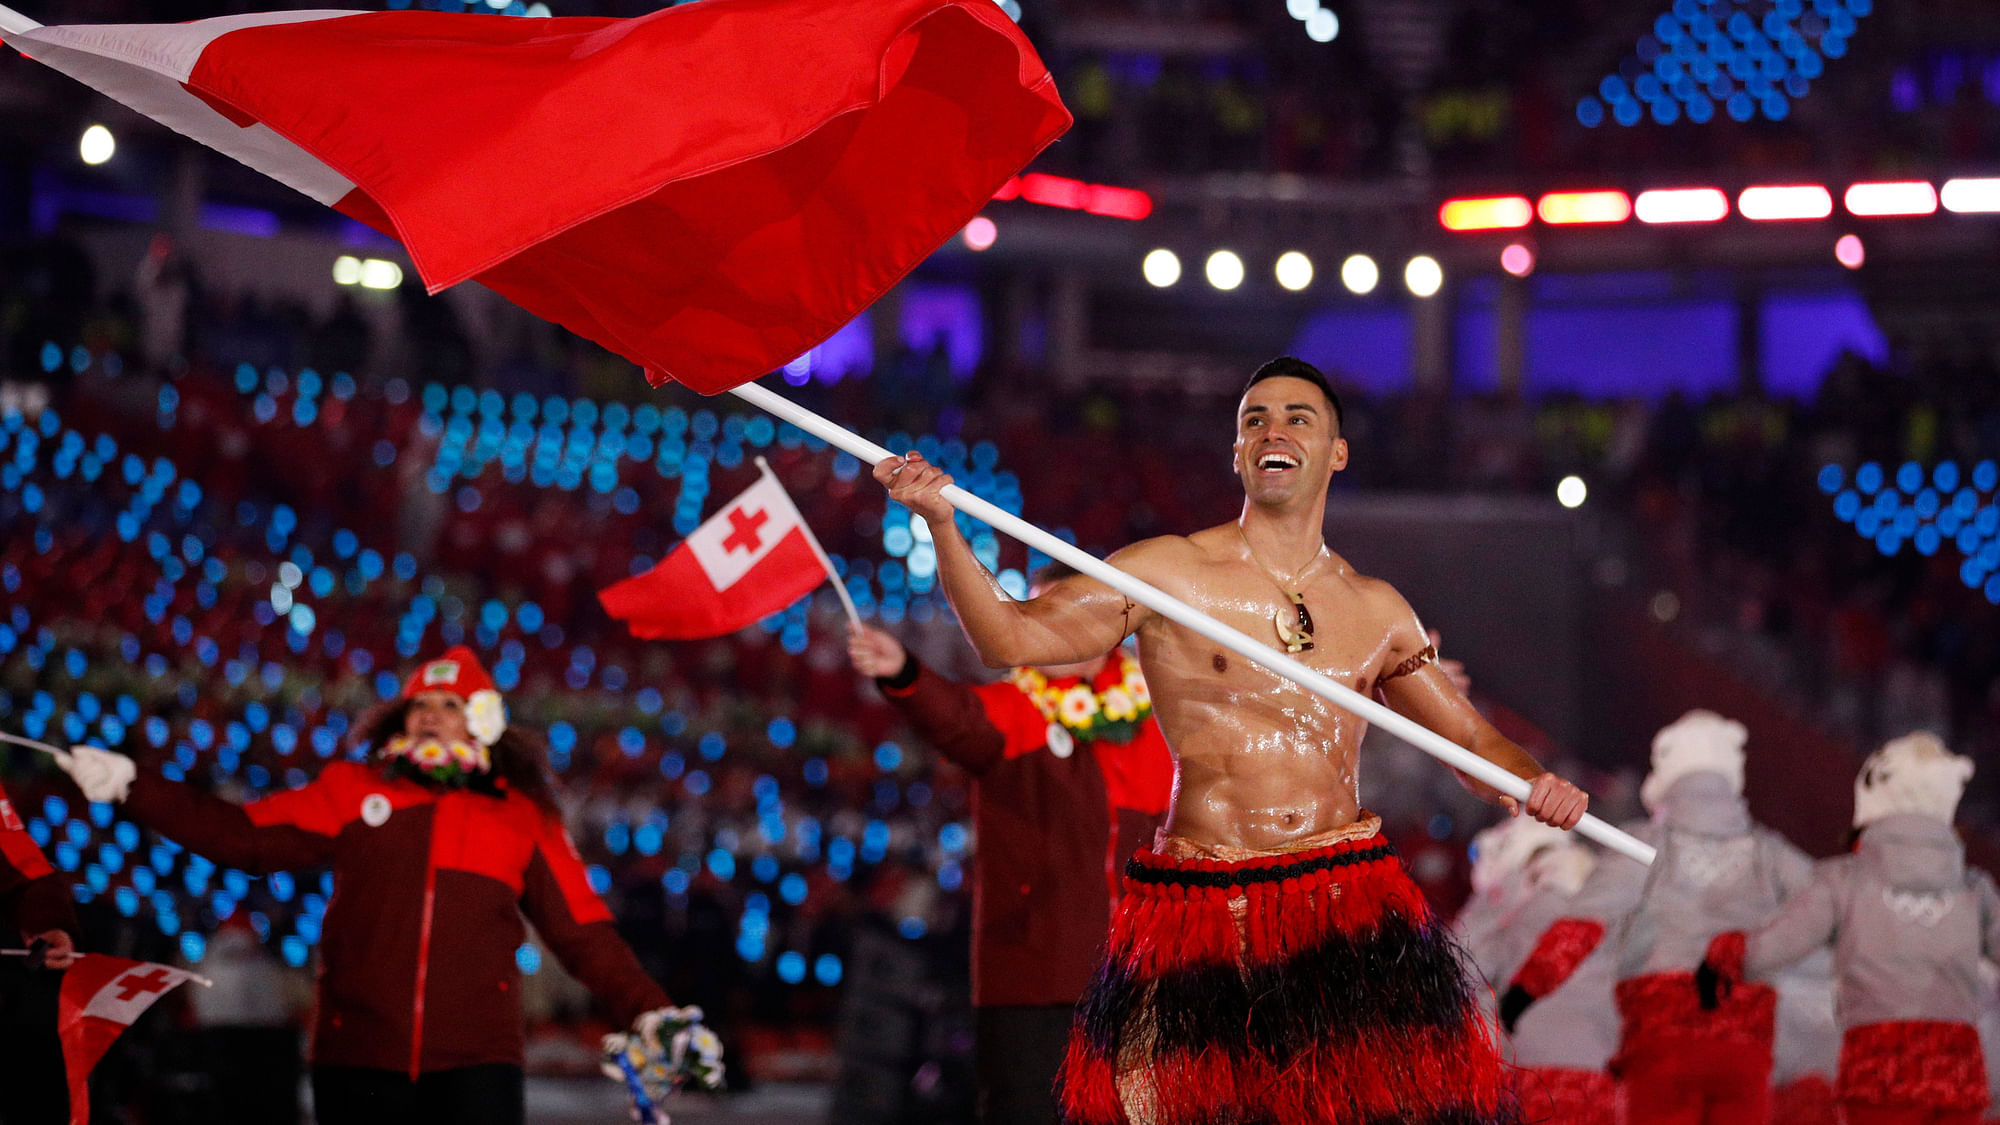 Pita Taufatofua carries the flag of Tonga during the opening ceremony of the 2018 Winter Olympics in Pyeongchang, South Korea, Friday, Feb. 9, 2018.&nbsp;